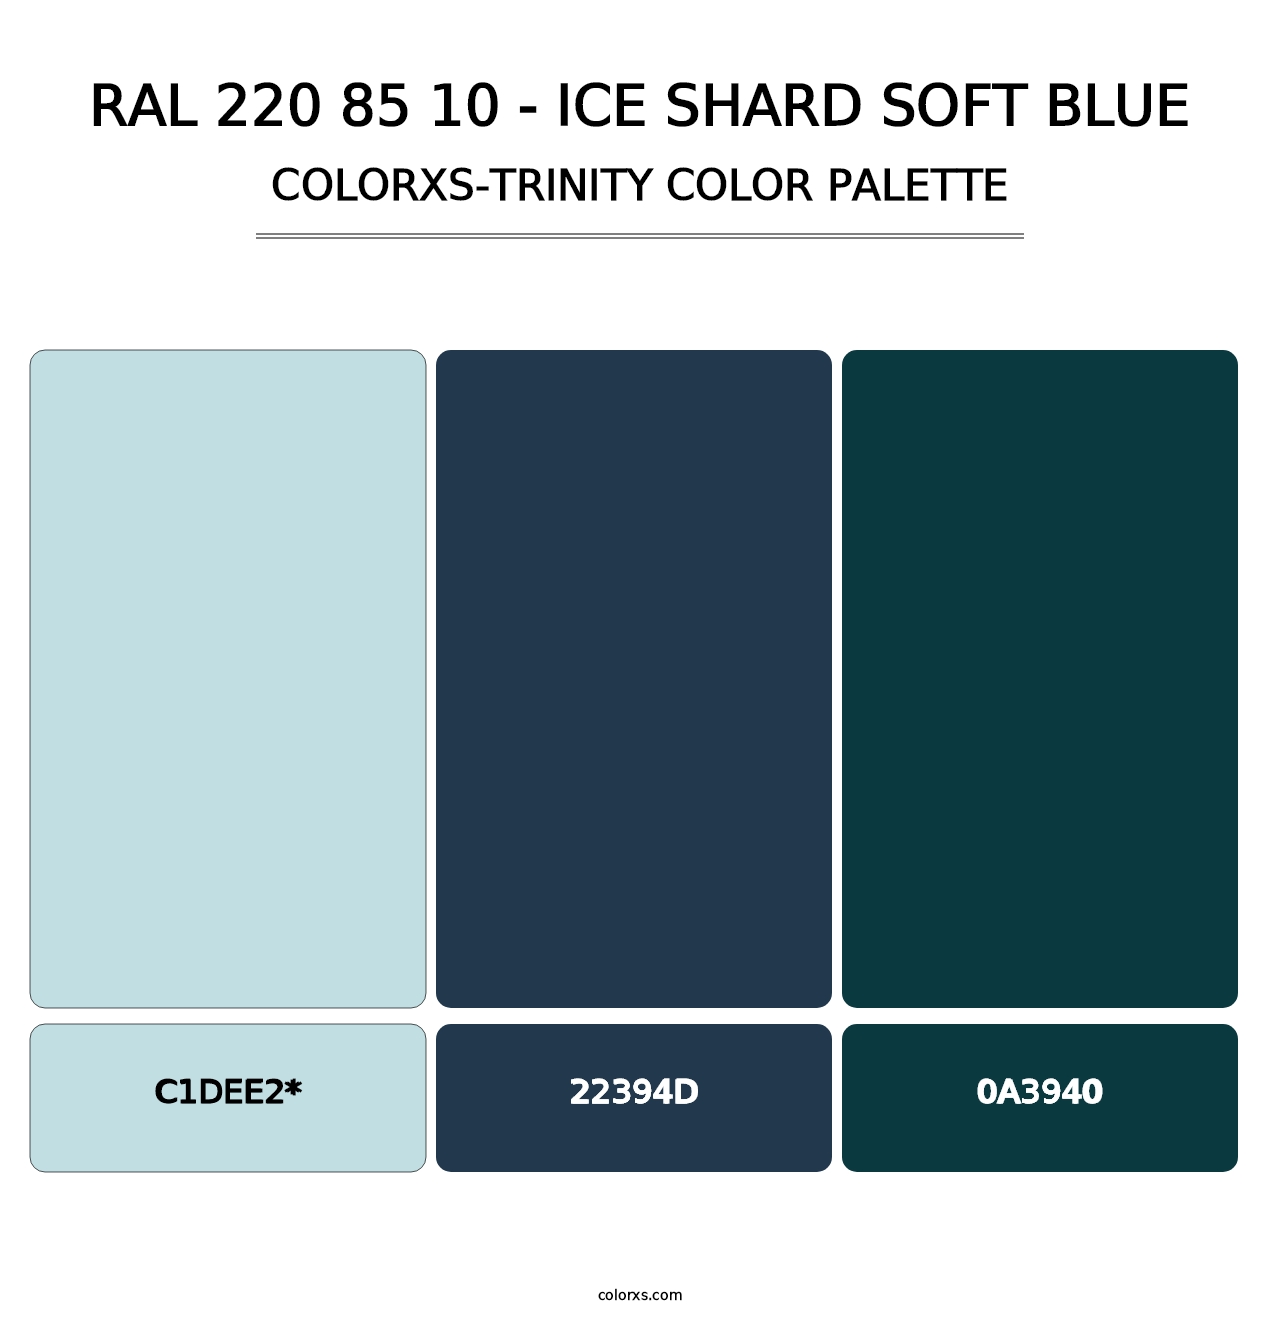 RAL 220 85 10 - Ice Shard Soft Blue - Colorxs Trinity Palette